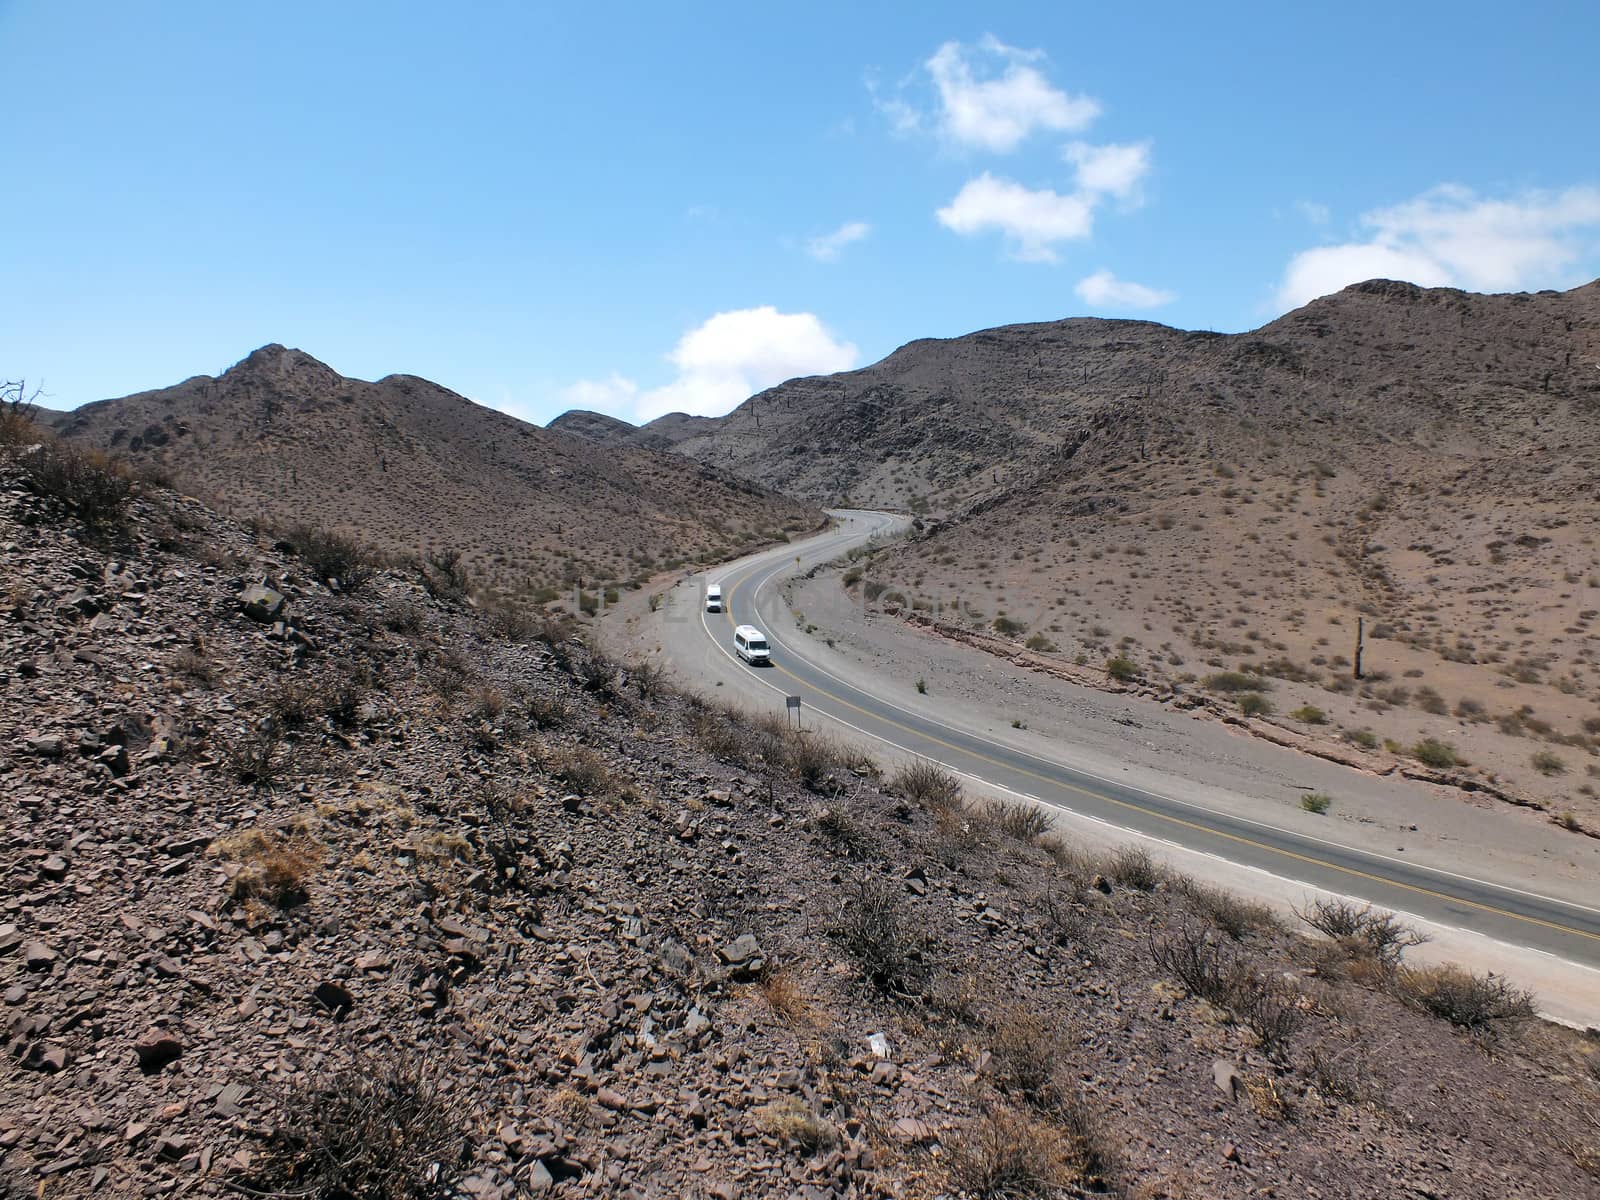 The road linking Salta with the RN40 at Cachi passes through the Los Cardones National Park.